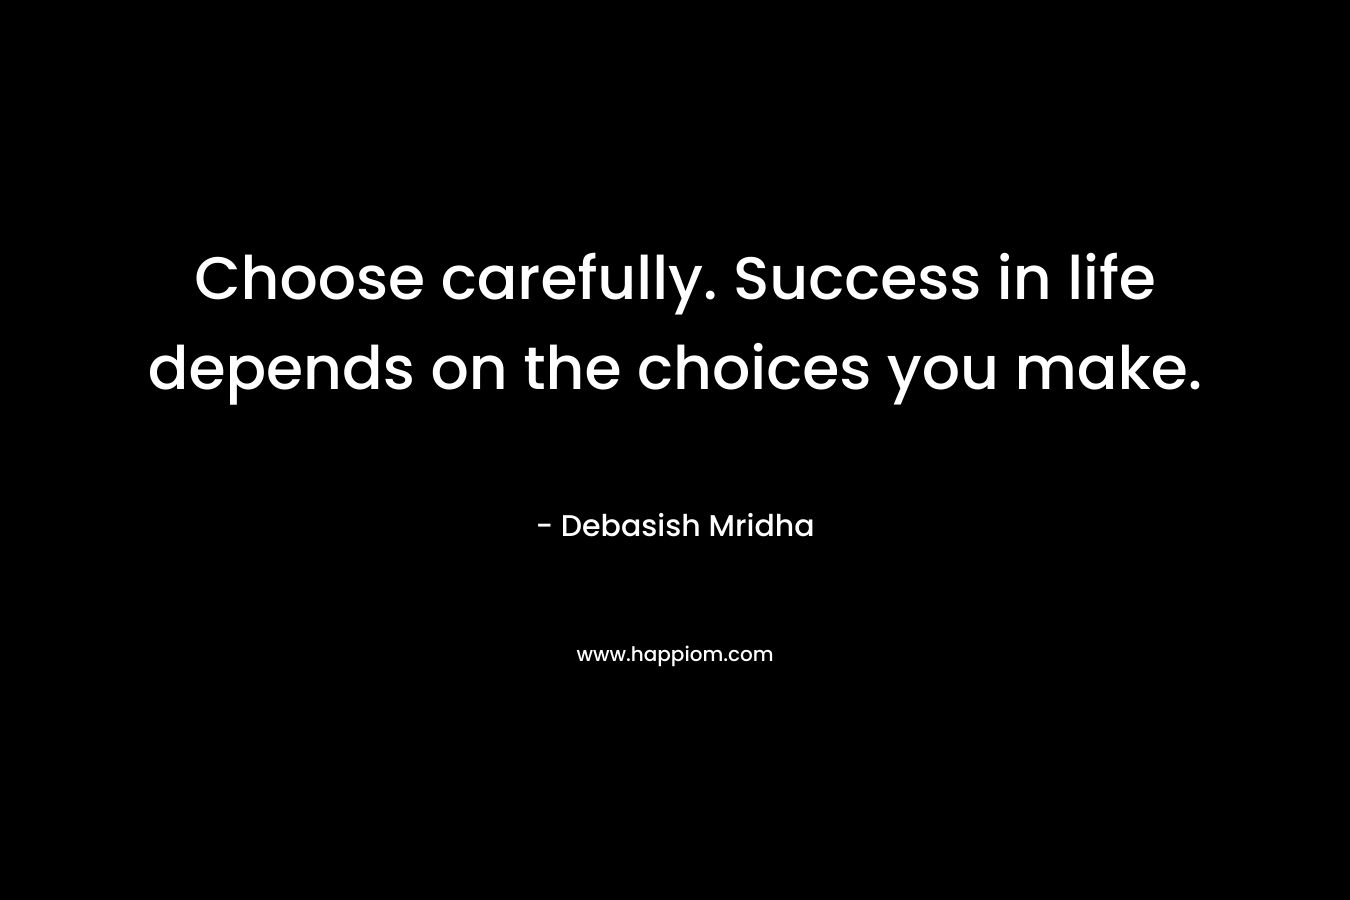 Choose carefully. Success in life depends on the choices you make.